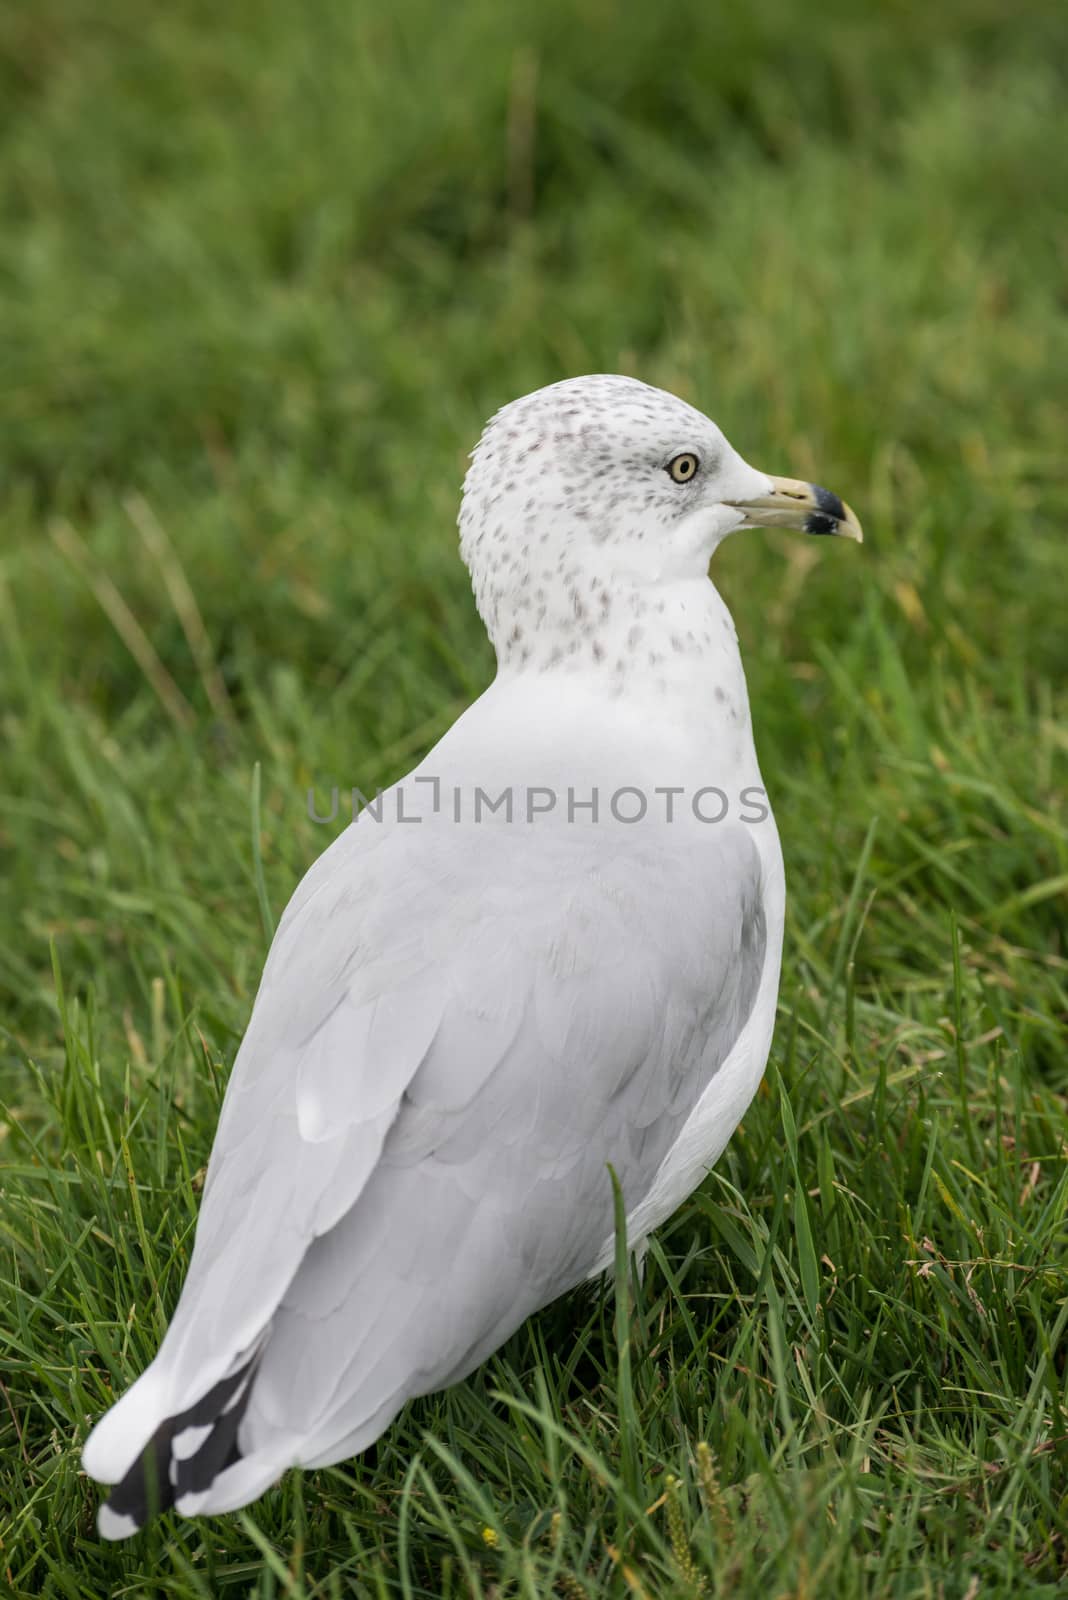 Seagull standing in a grass field  by IVYPHOTOS